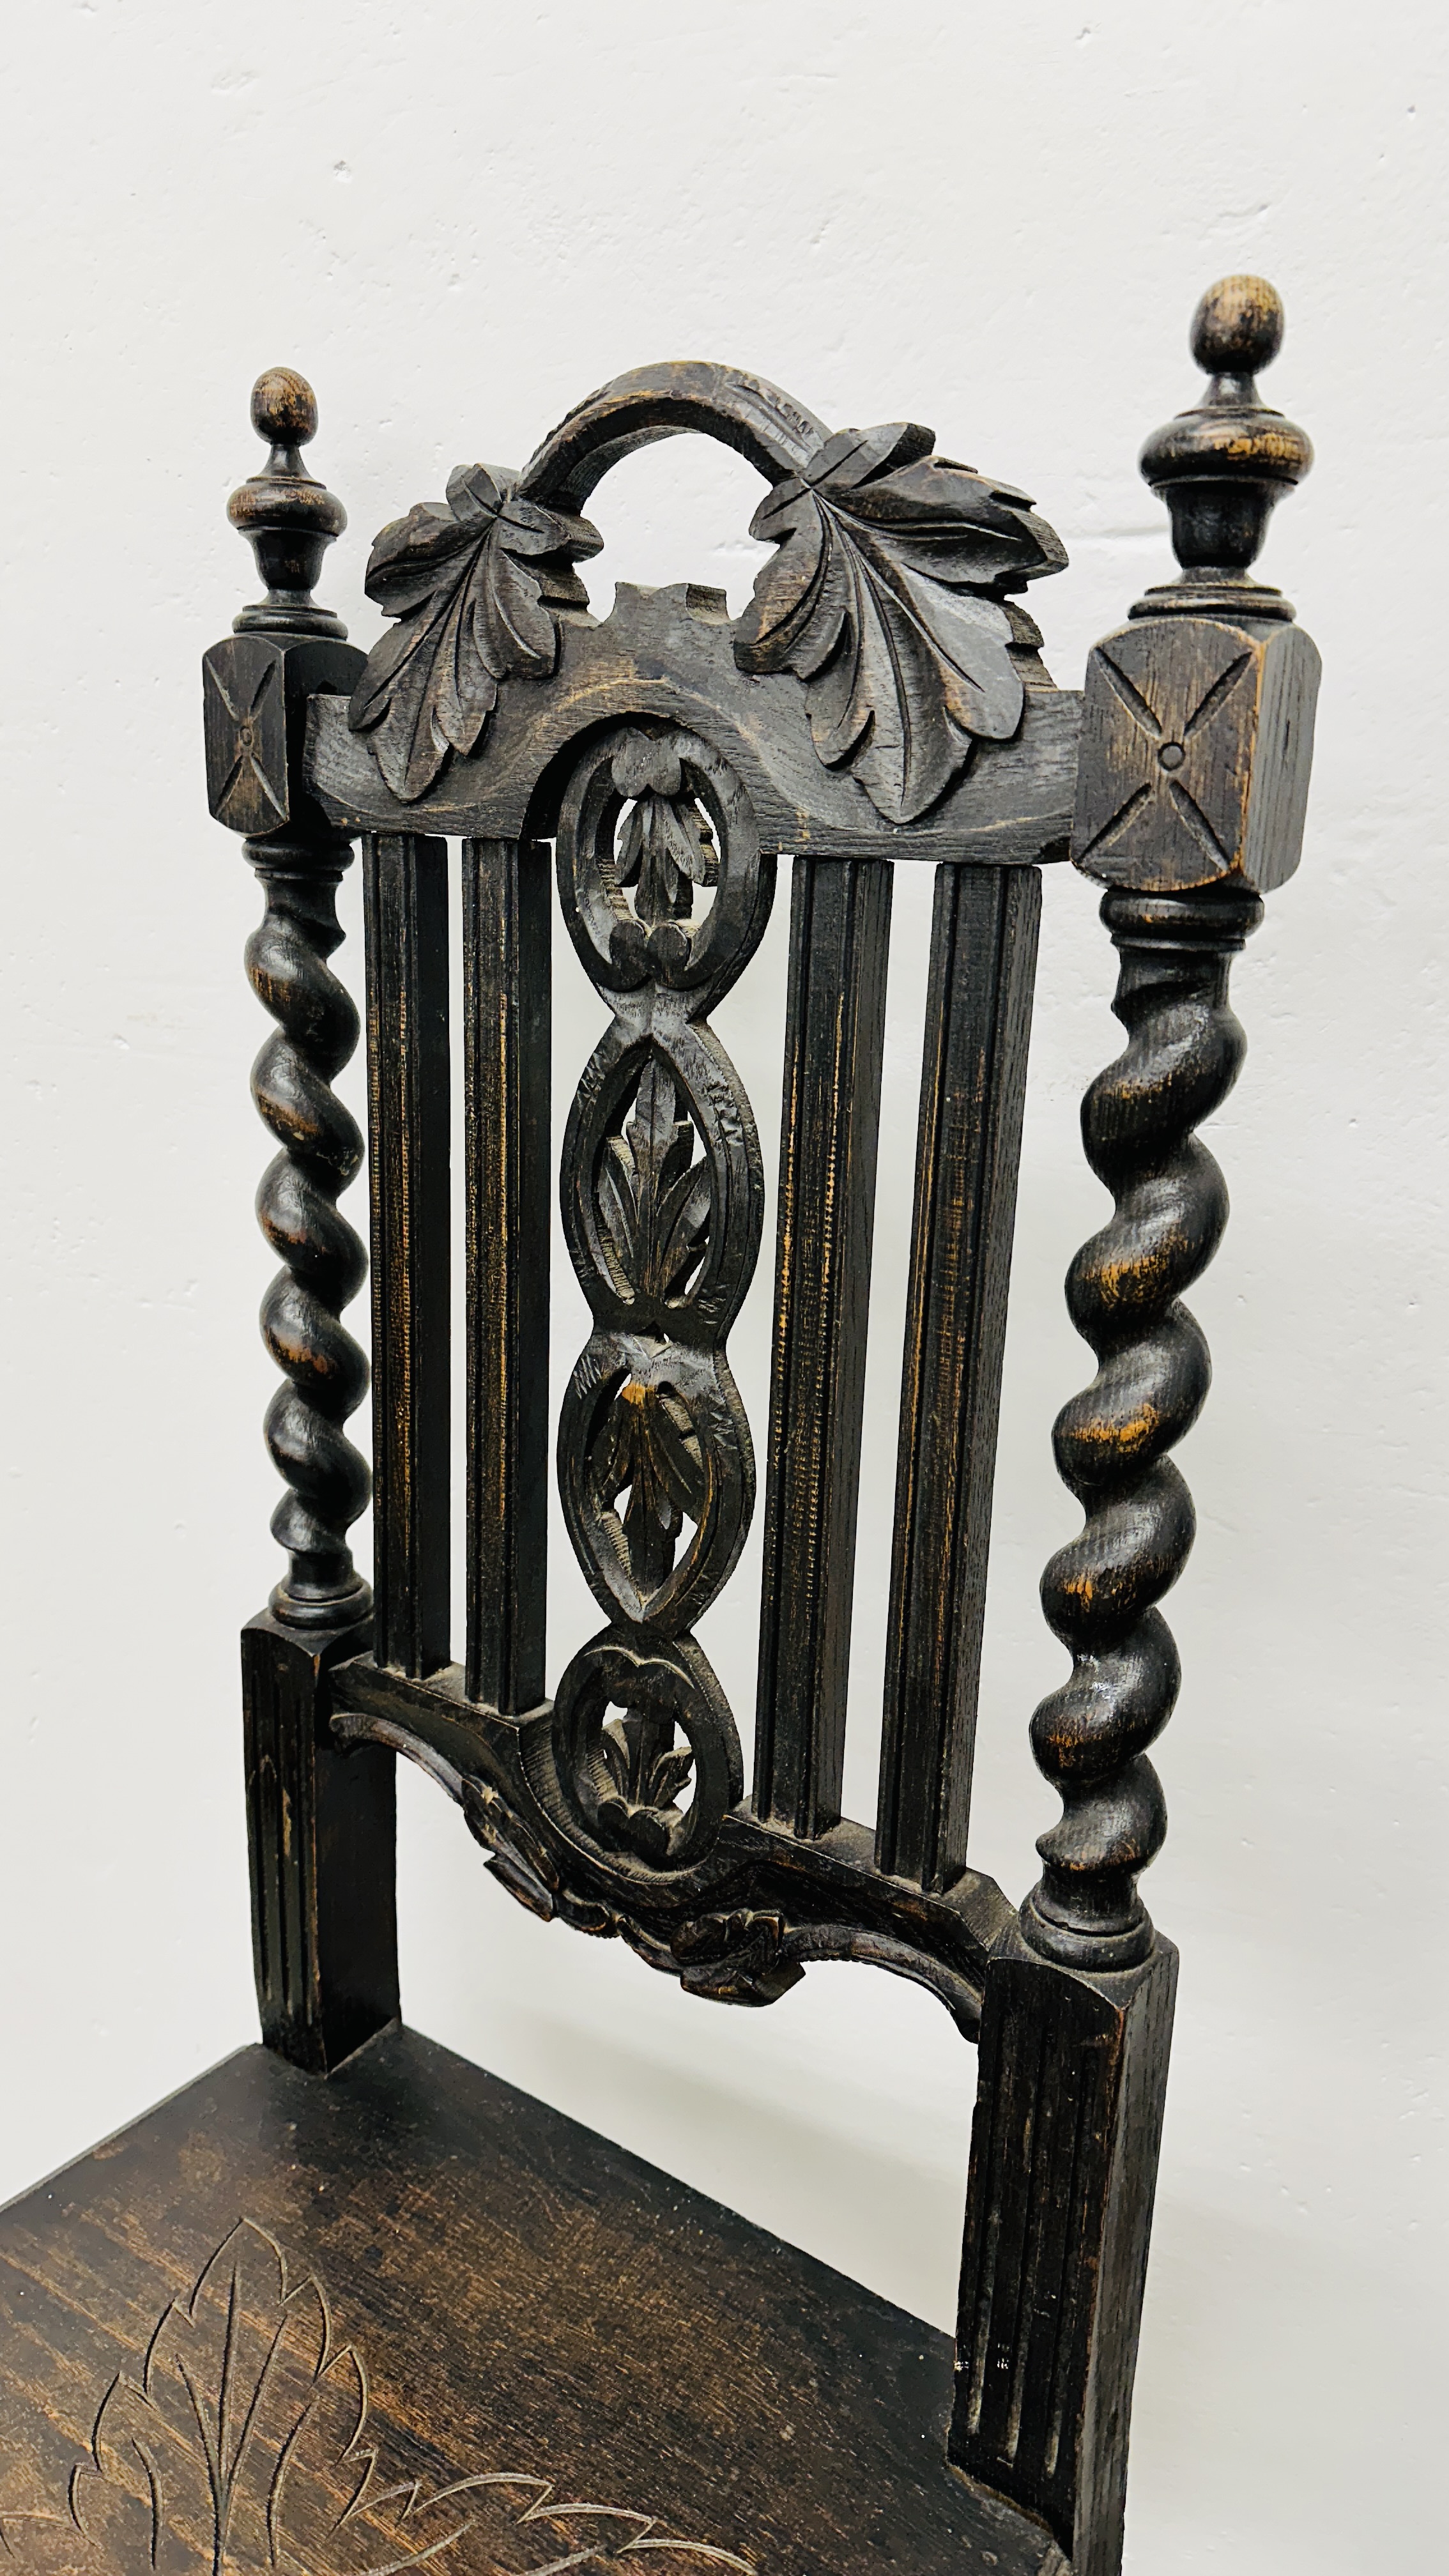 A PAIR OF ANTIQUE OAK HALL CHAIRS WITH CARVED DETAIL AND BARLEY TWIST SUPPORTS. - Image 9 of 9